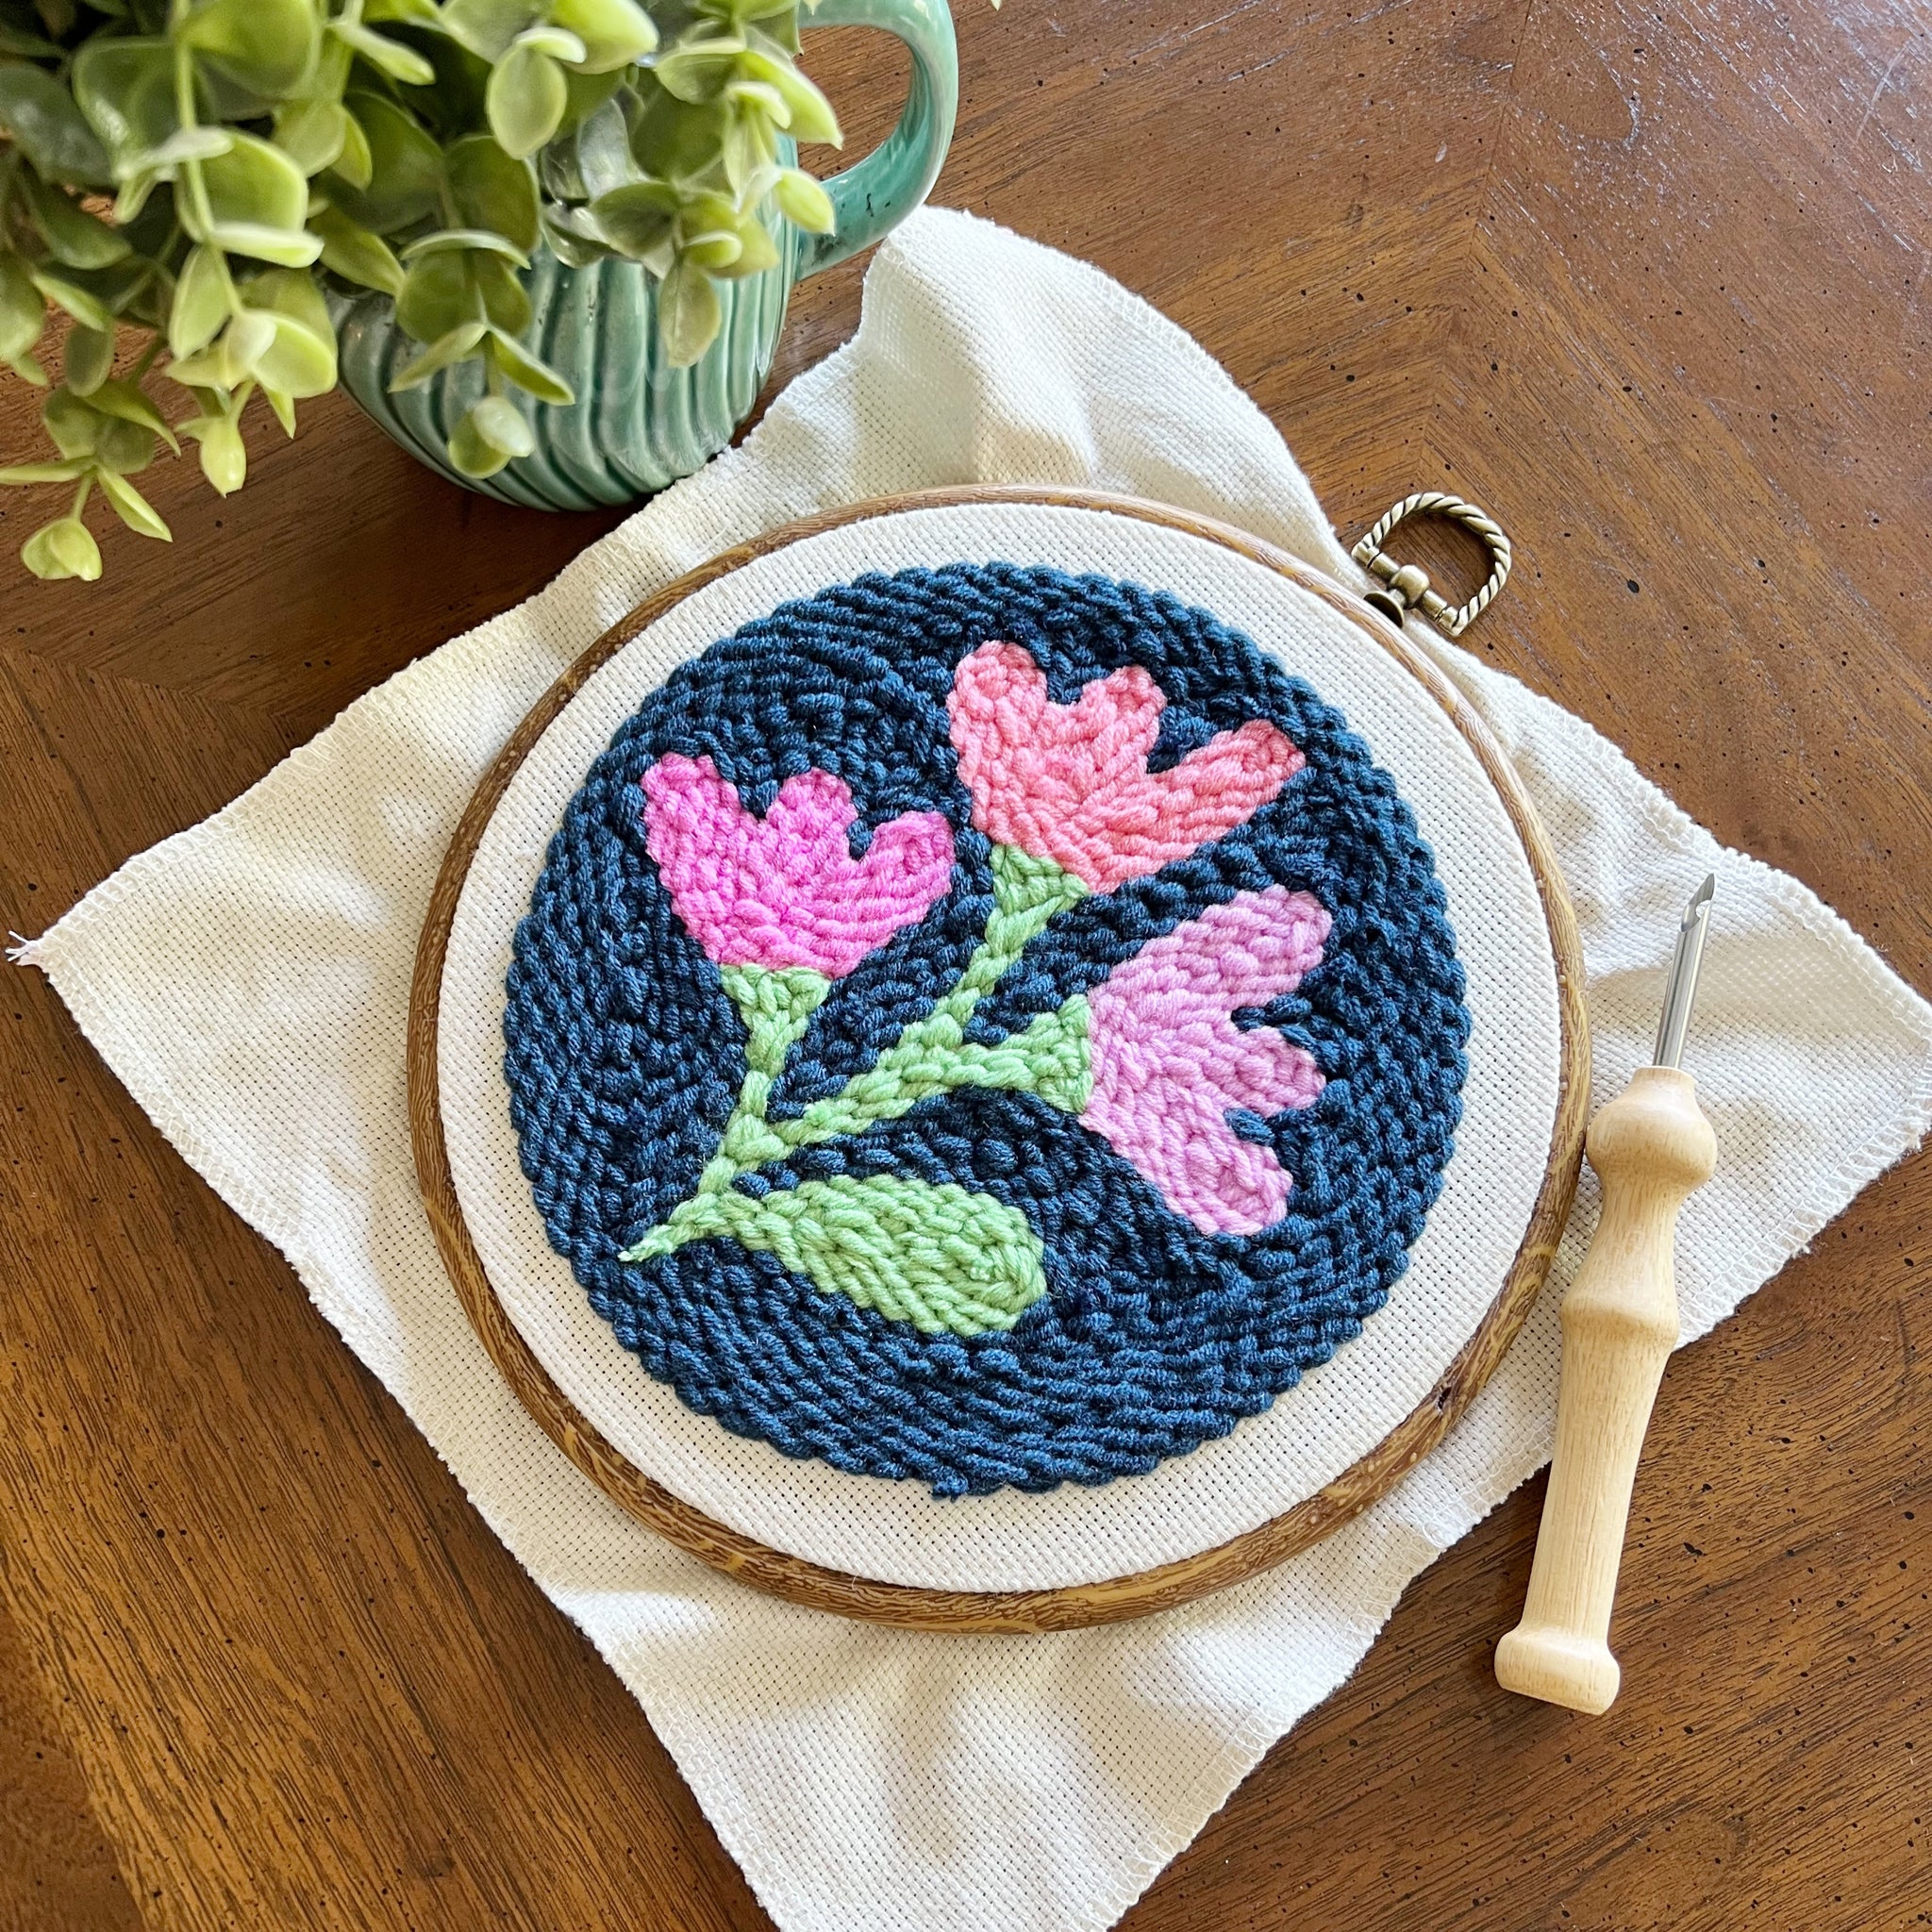 Punch Needle Embroidery kit DIY Flowers Cross Stitch Hoop Craft Kits  Handcraft Embroidery s